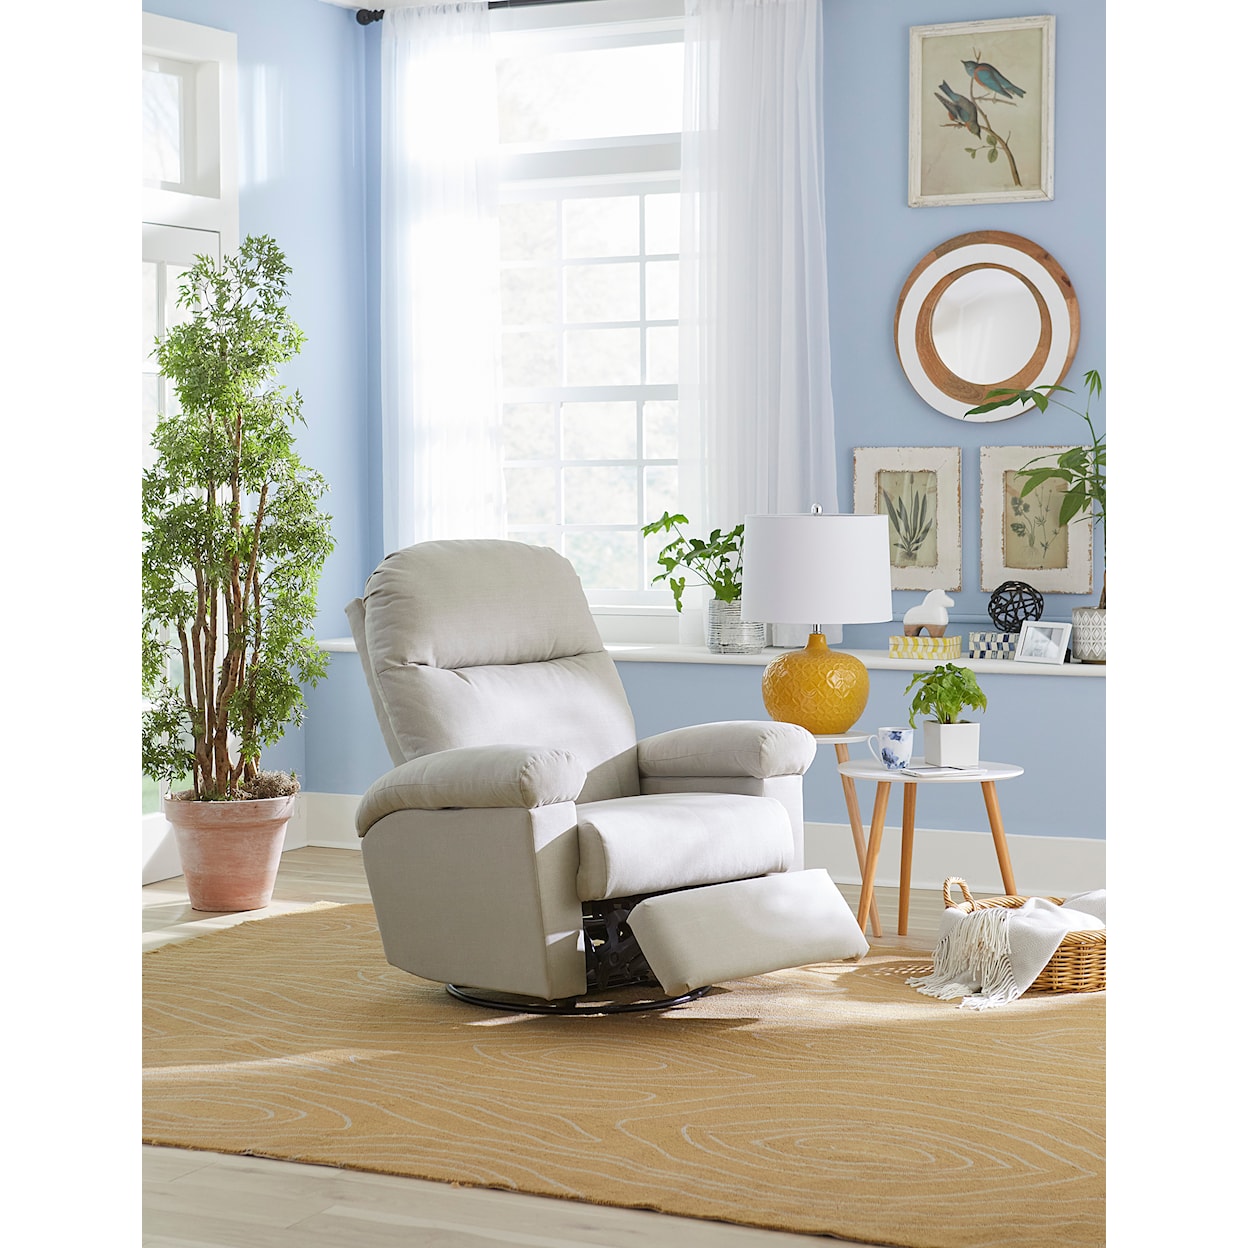 Best Home Furnishings Jodie Pwr Swivel Recliner w/ Adjustable Arms & HR